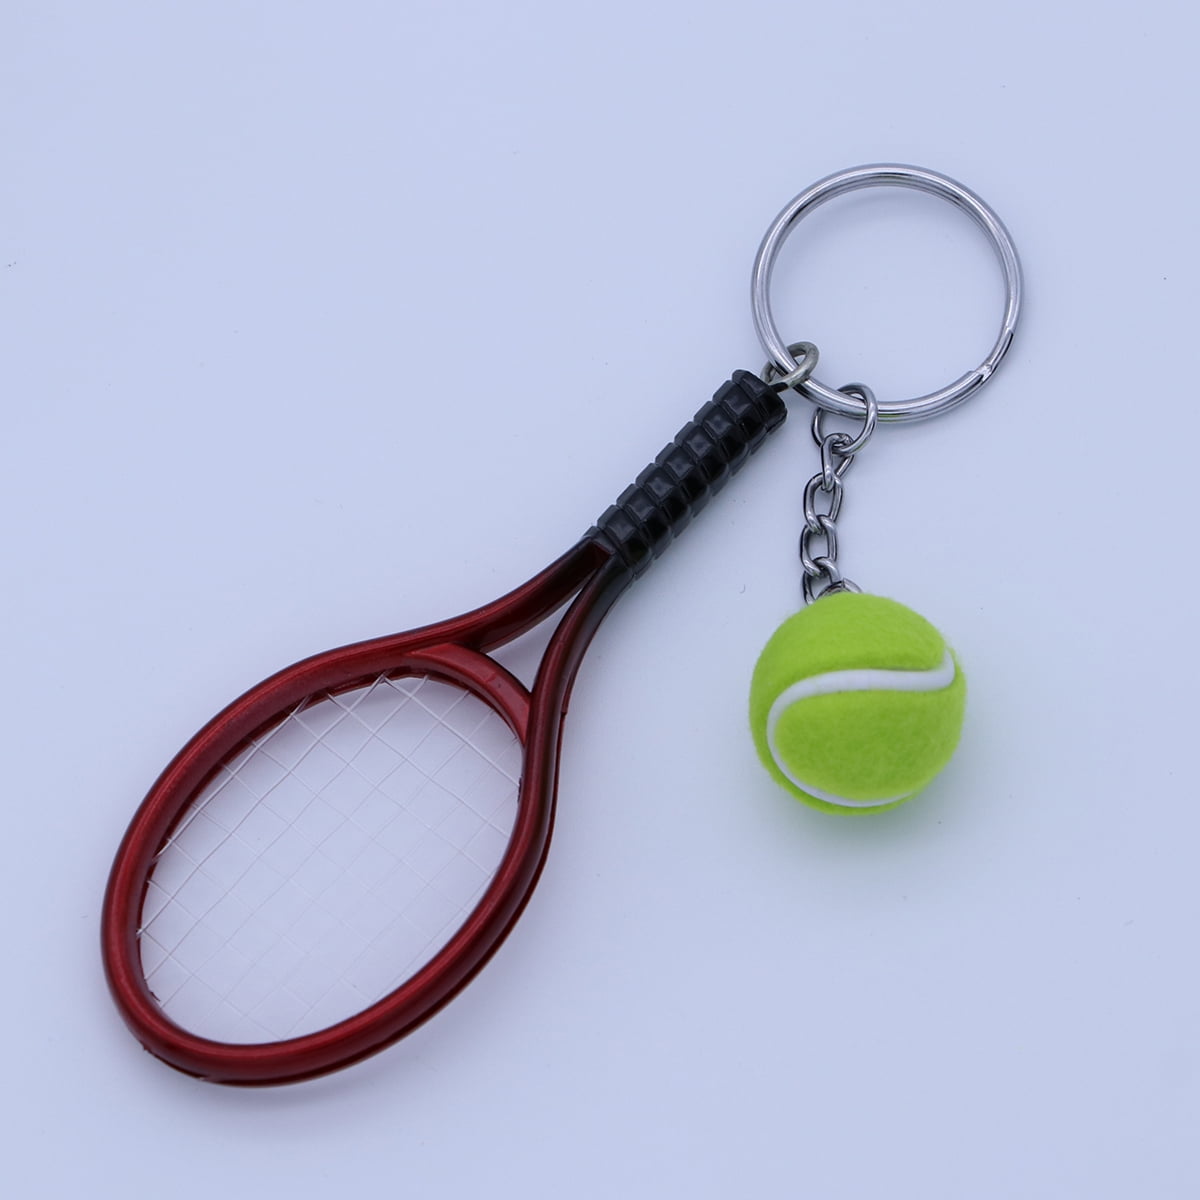 Small Tennis Ball Racket Pendant Key Ring Creative Gift for Family Friend #2 